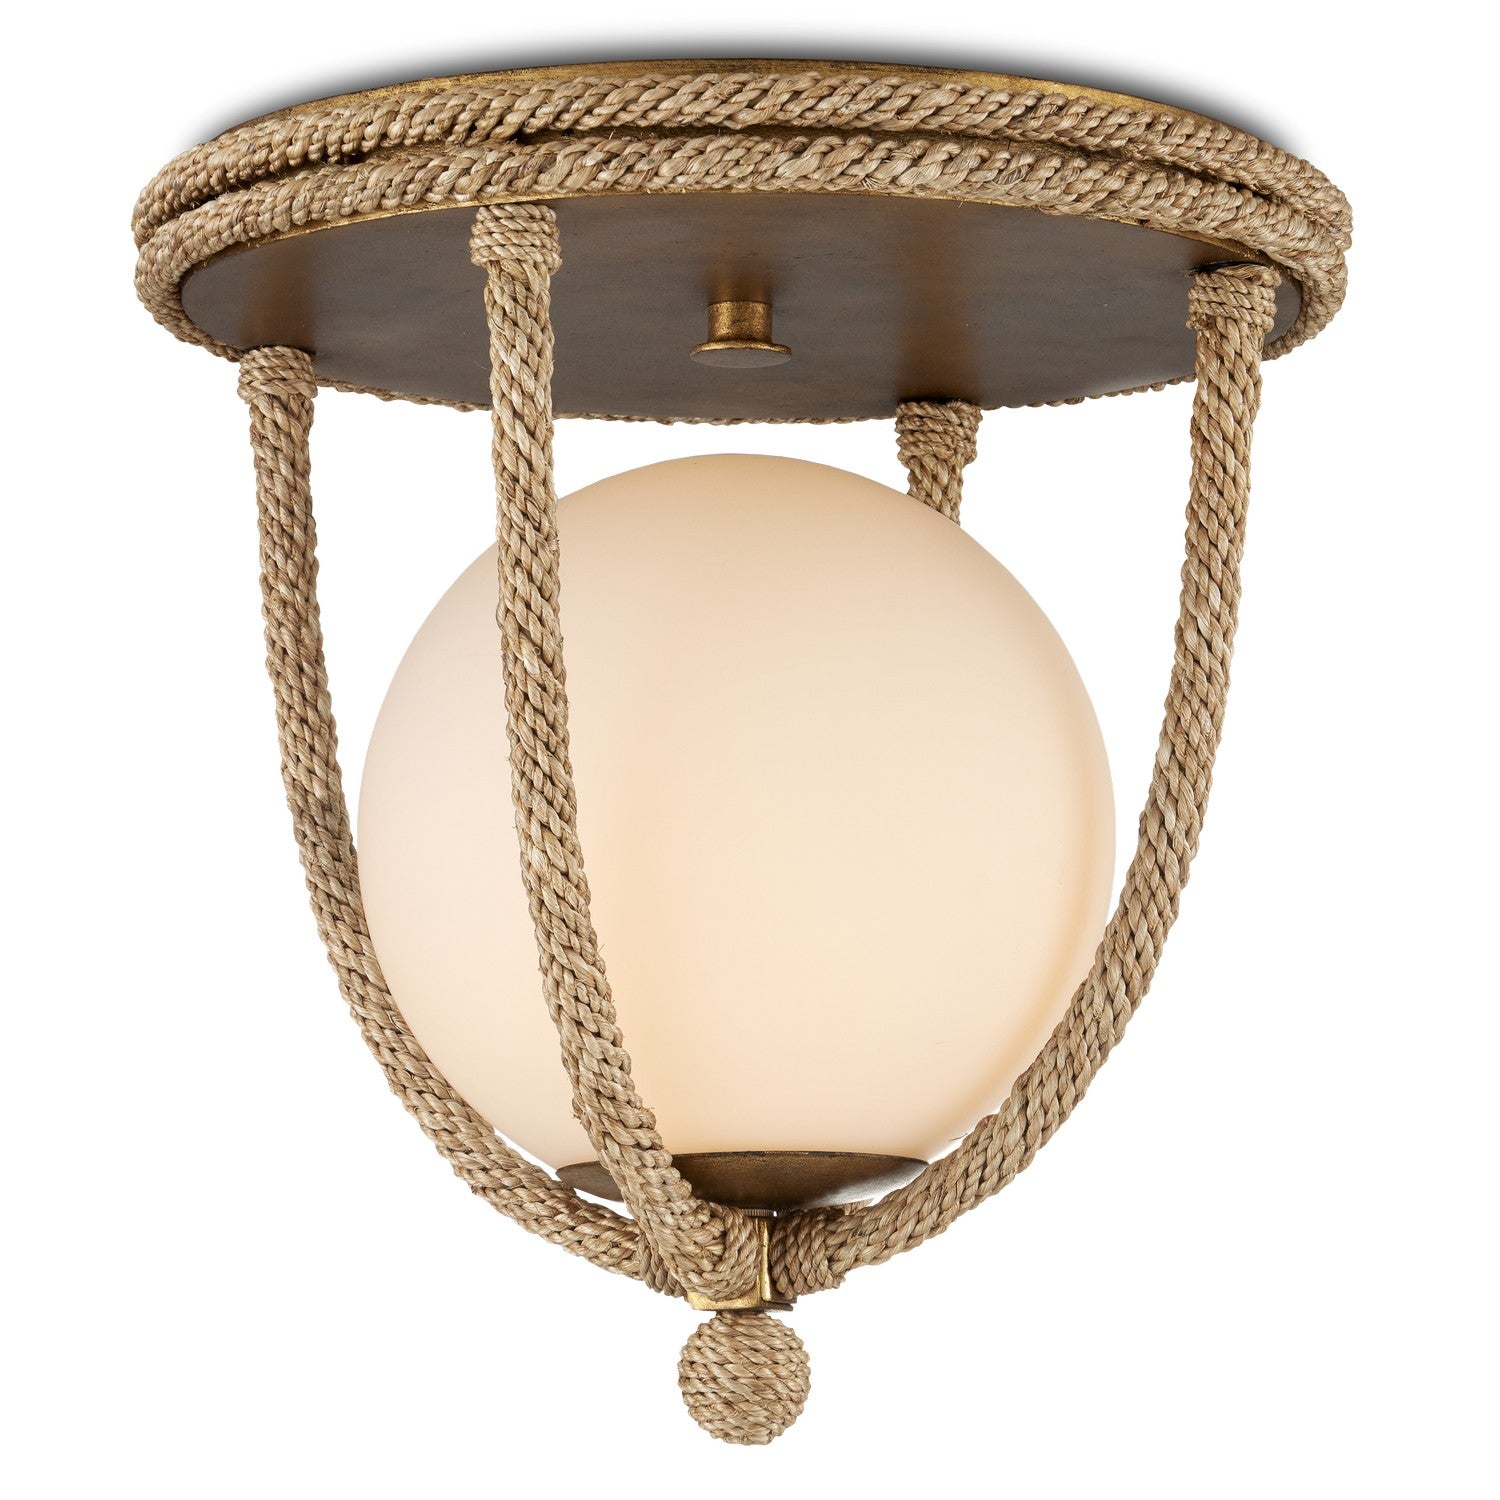 Currey and Company - 9999-0069 - One Light Flush Mount - Natural/Dorado Gold/Frosted White